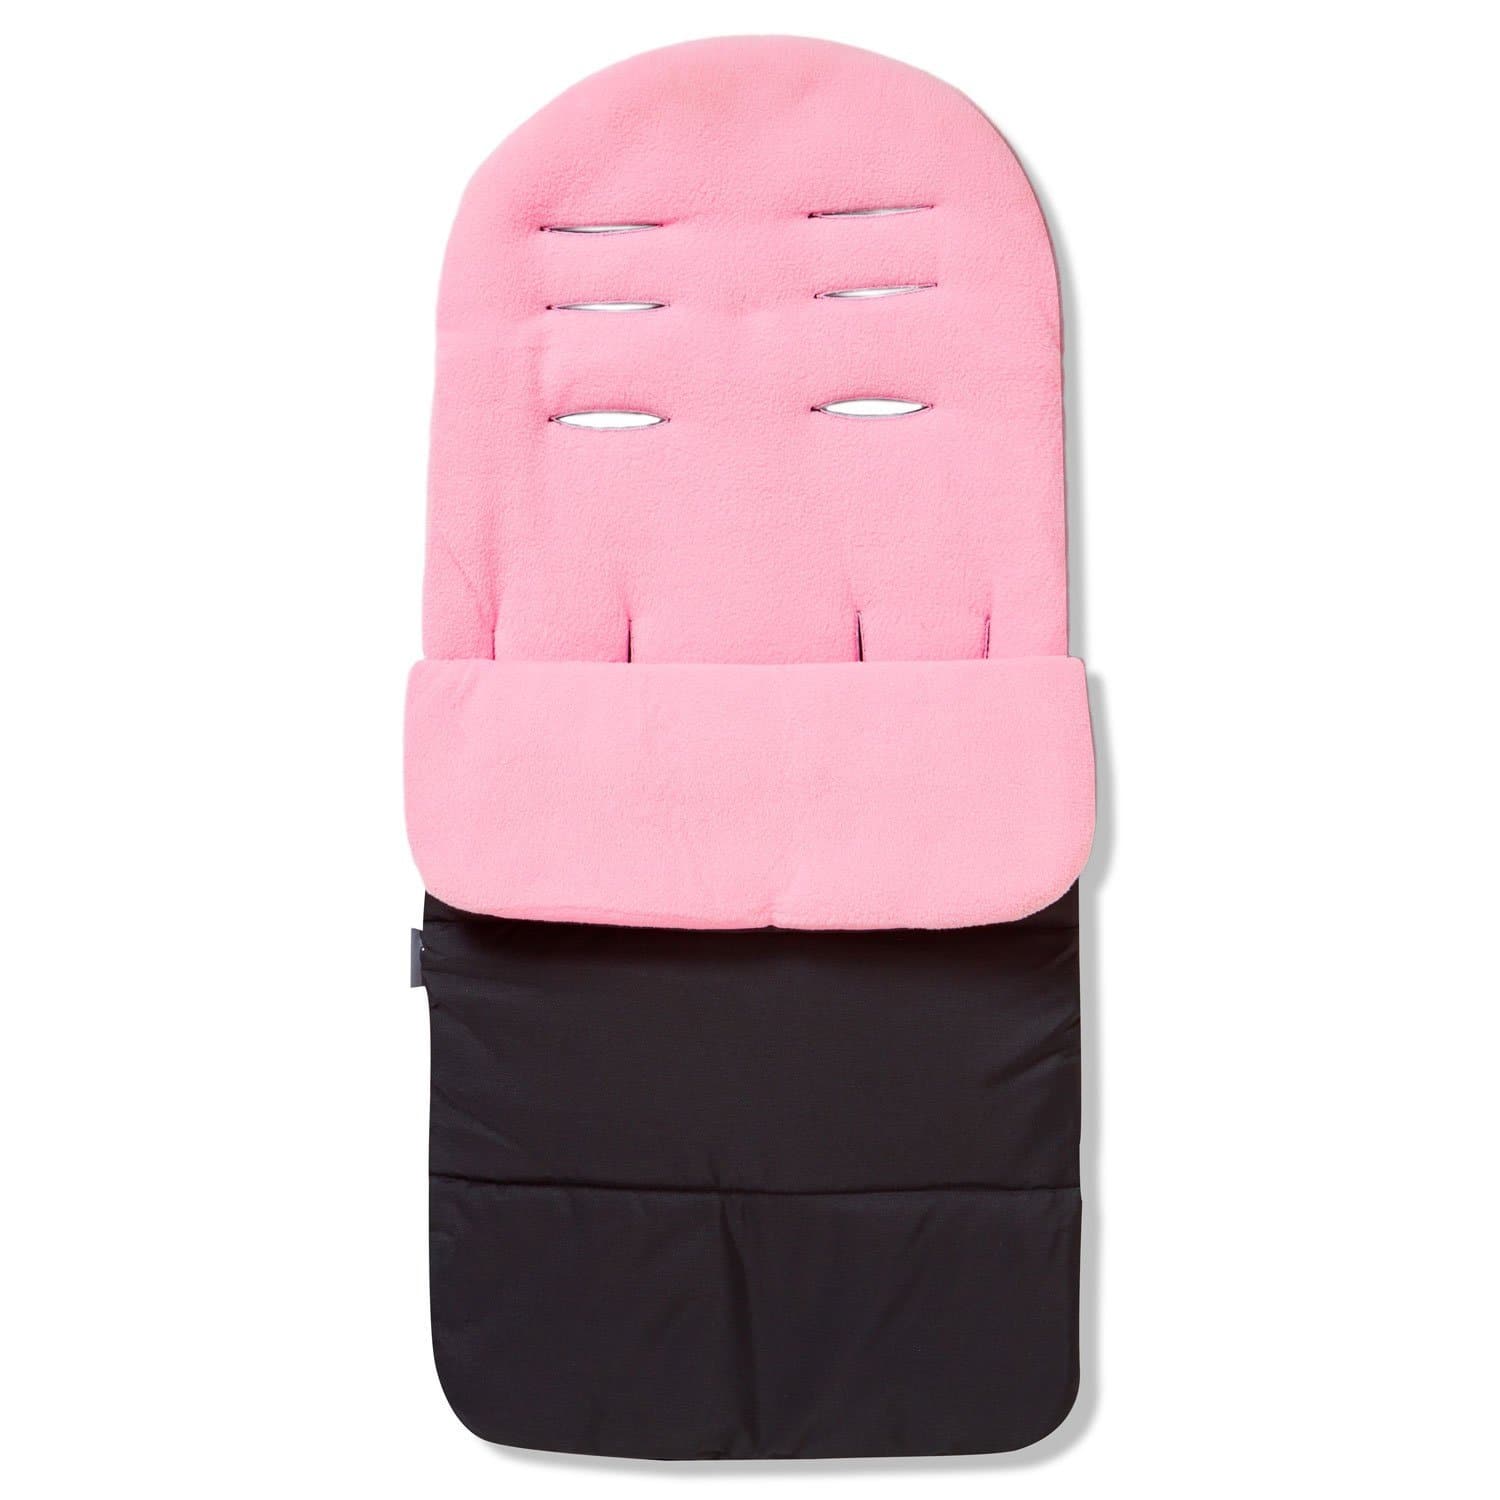 Premium Footmuff / Cosy Toes Compatible with Brevi - Candy Pink / Fits All Models | For Your Little One